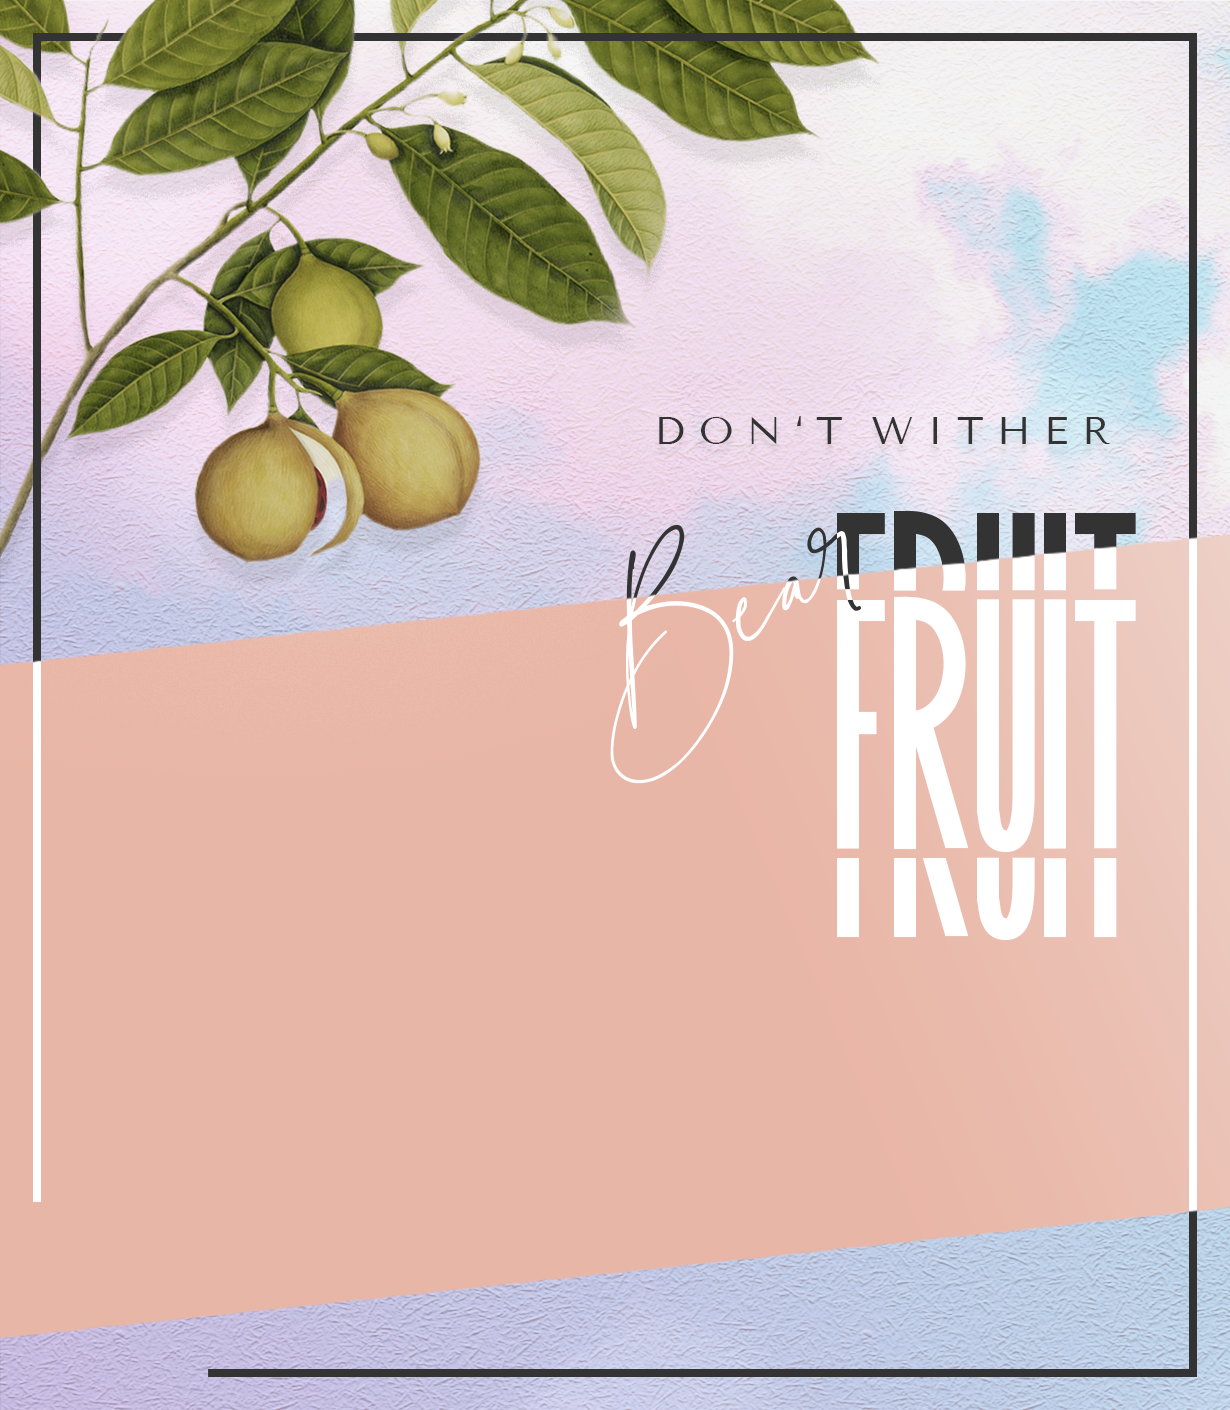 (May Your Life + Ministry) Bear MUCH Fruit // Get Served via Crucifly (Services) \\ Faith-Based Freelancing for Christian Churches, Ministries, Non-Profits, Pastors, Influencers, + more!